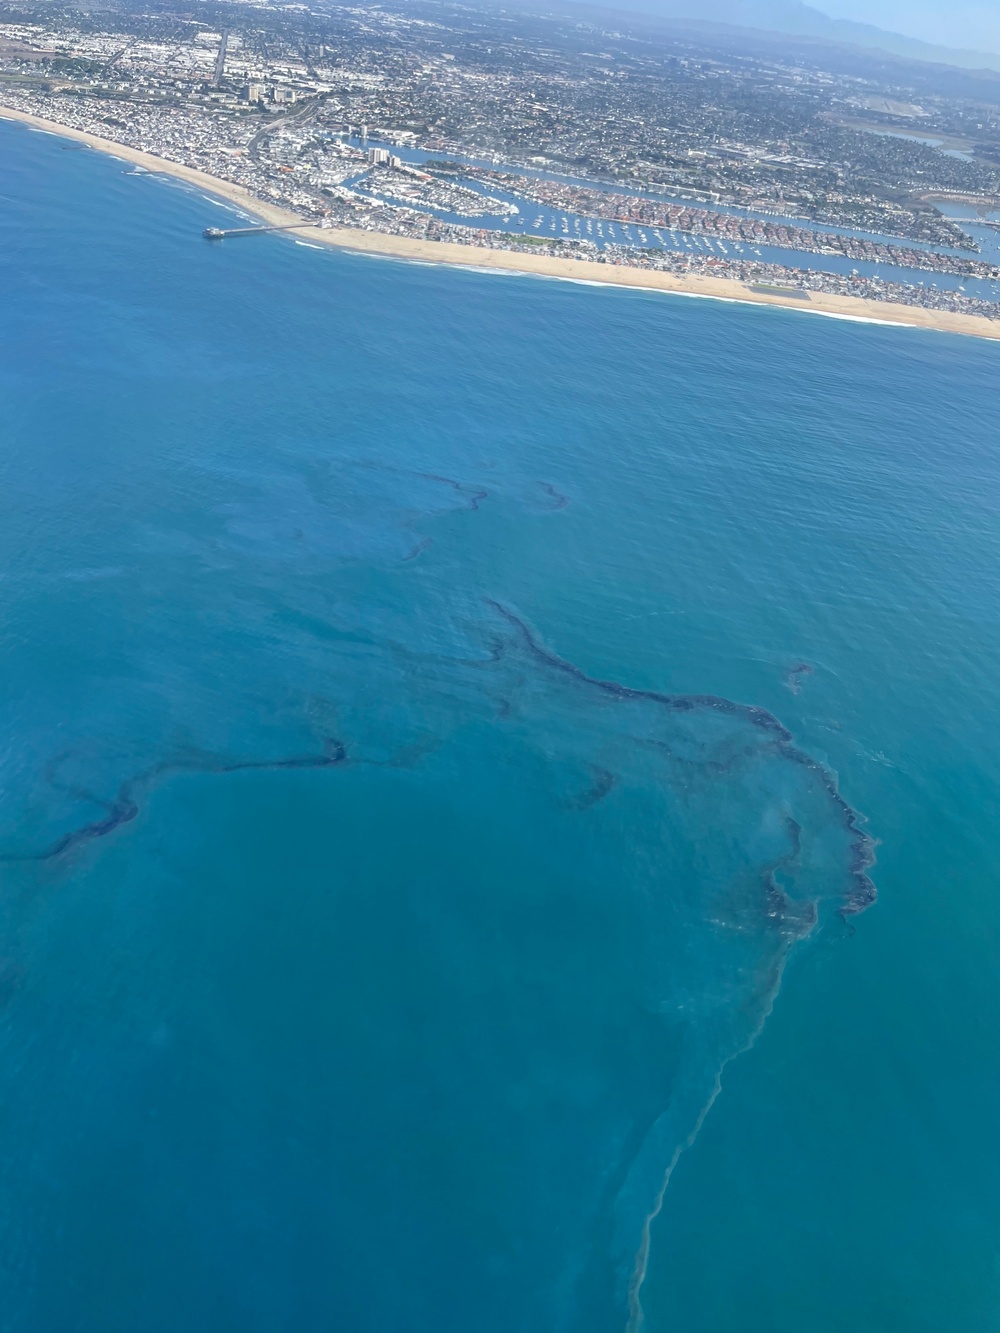 Unified command continues response to oil spill off Newport Beach